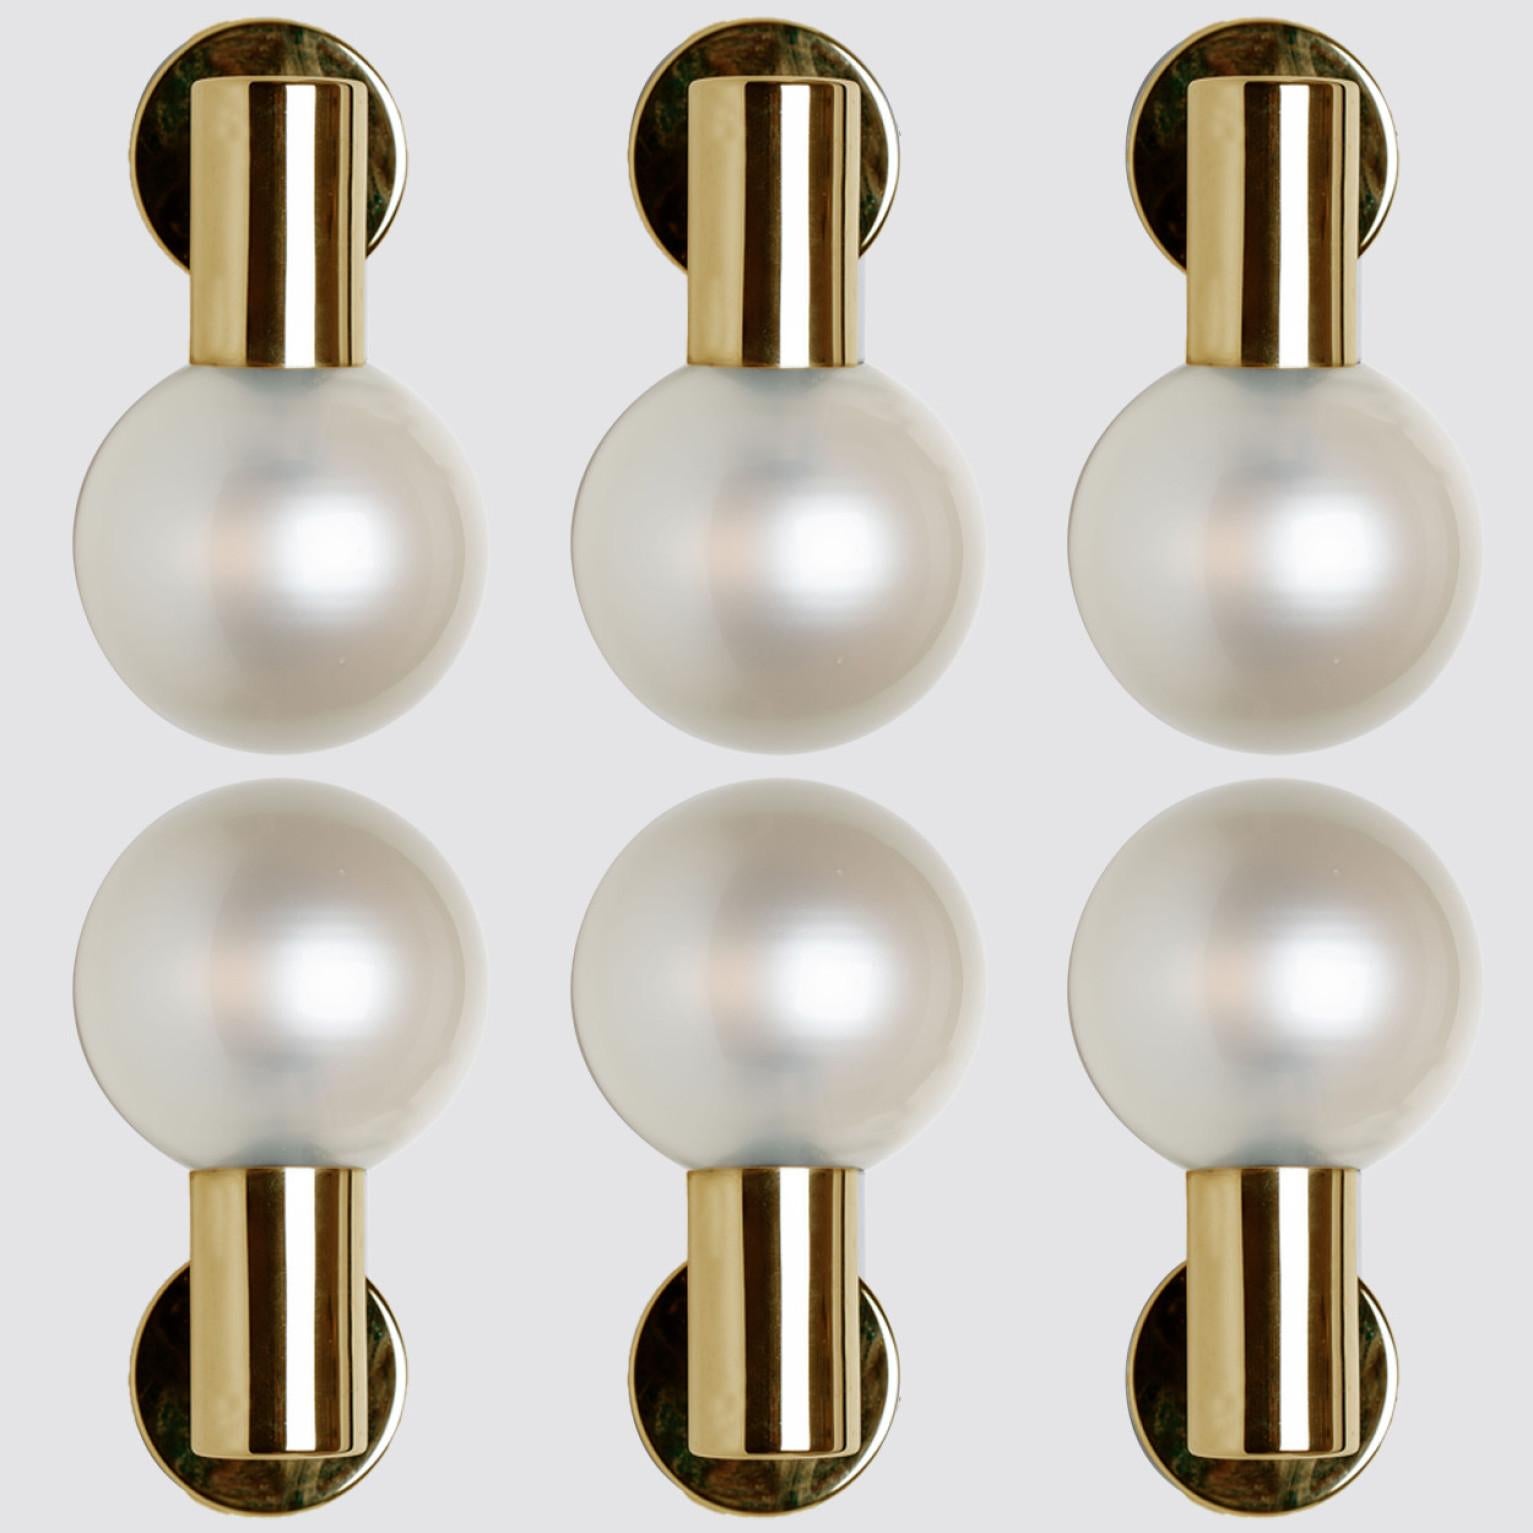 Large quantity of beautiful hand blown opal glass wall lights. Designed and manufactured by Glashütte Limburg, Germany around 1970.

Beautiful craftsmanship. These midcentury vintage lights feature a brass base with a fine opal glass shade.